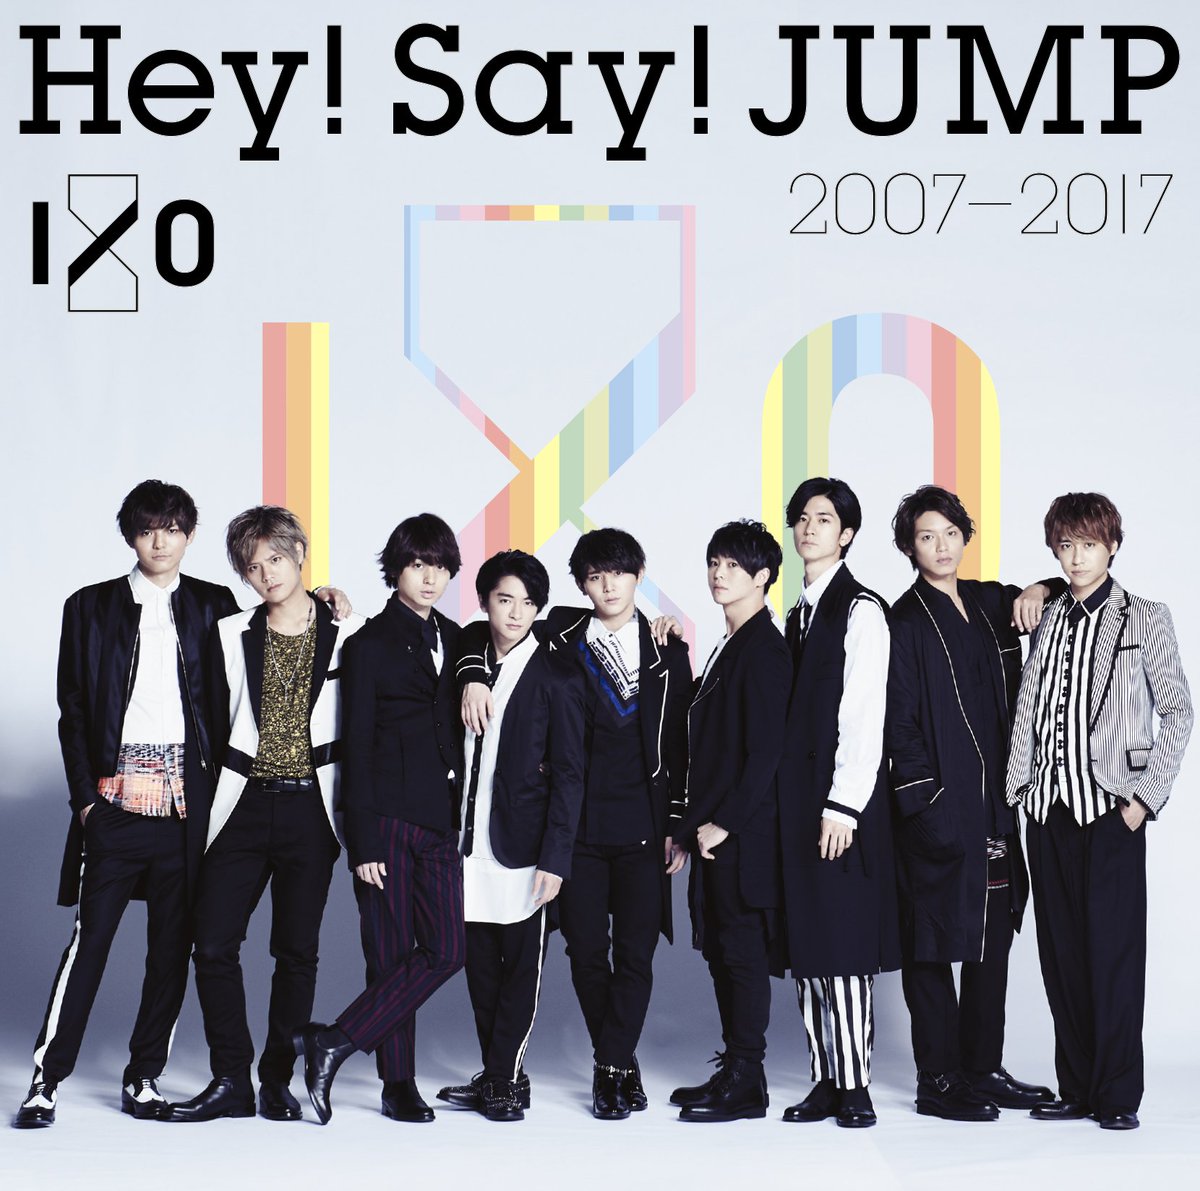 Hey! Say! JUMP releases best album details and Precious Girl 